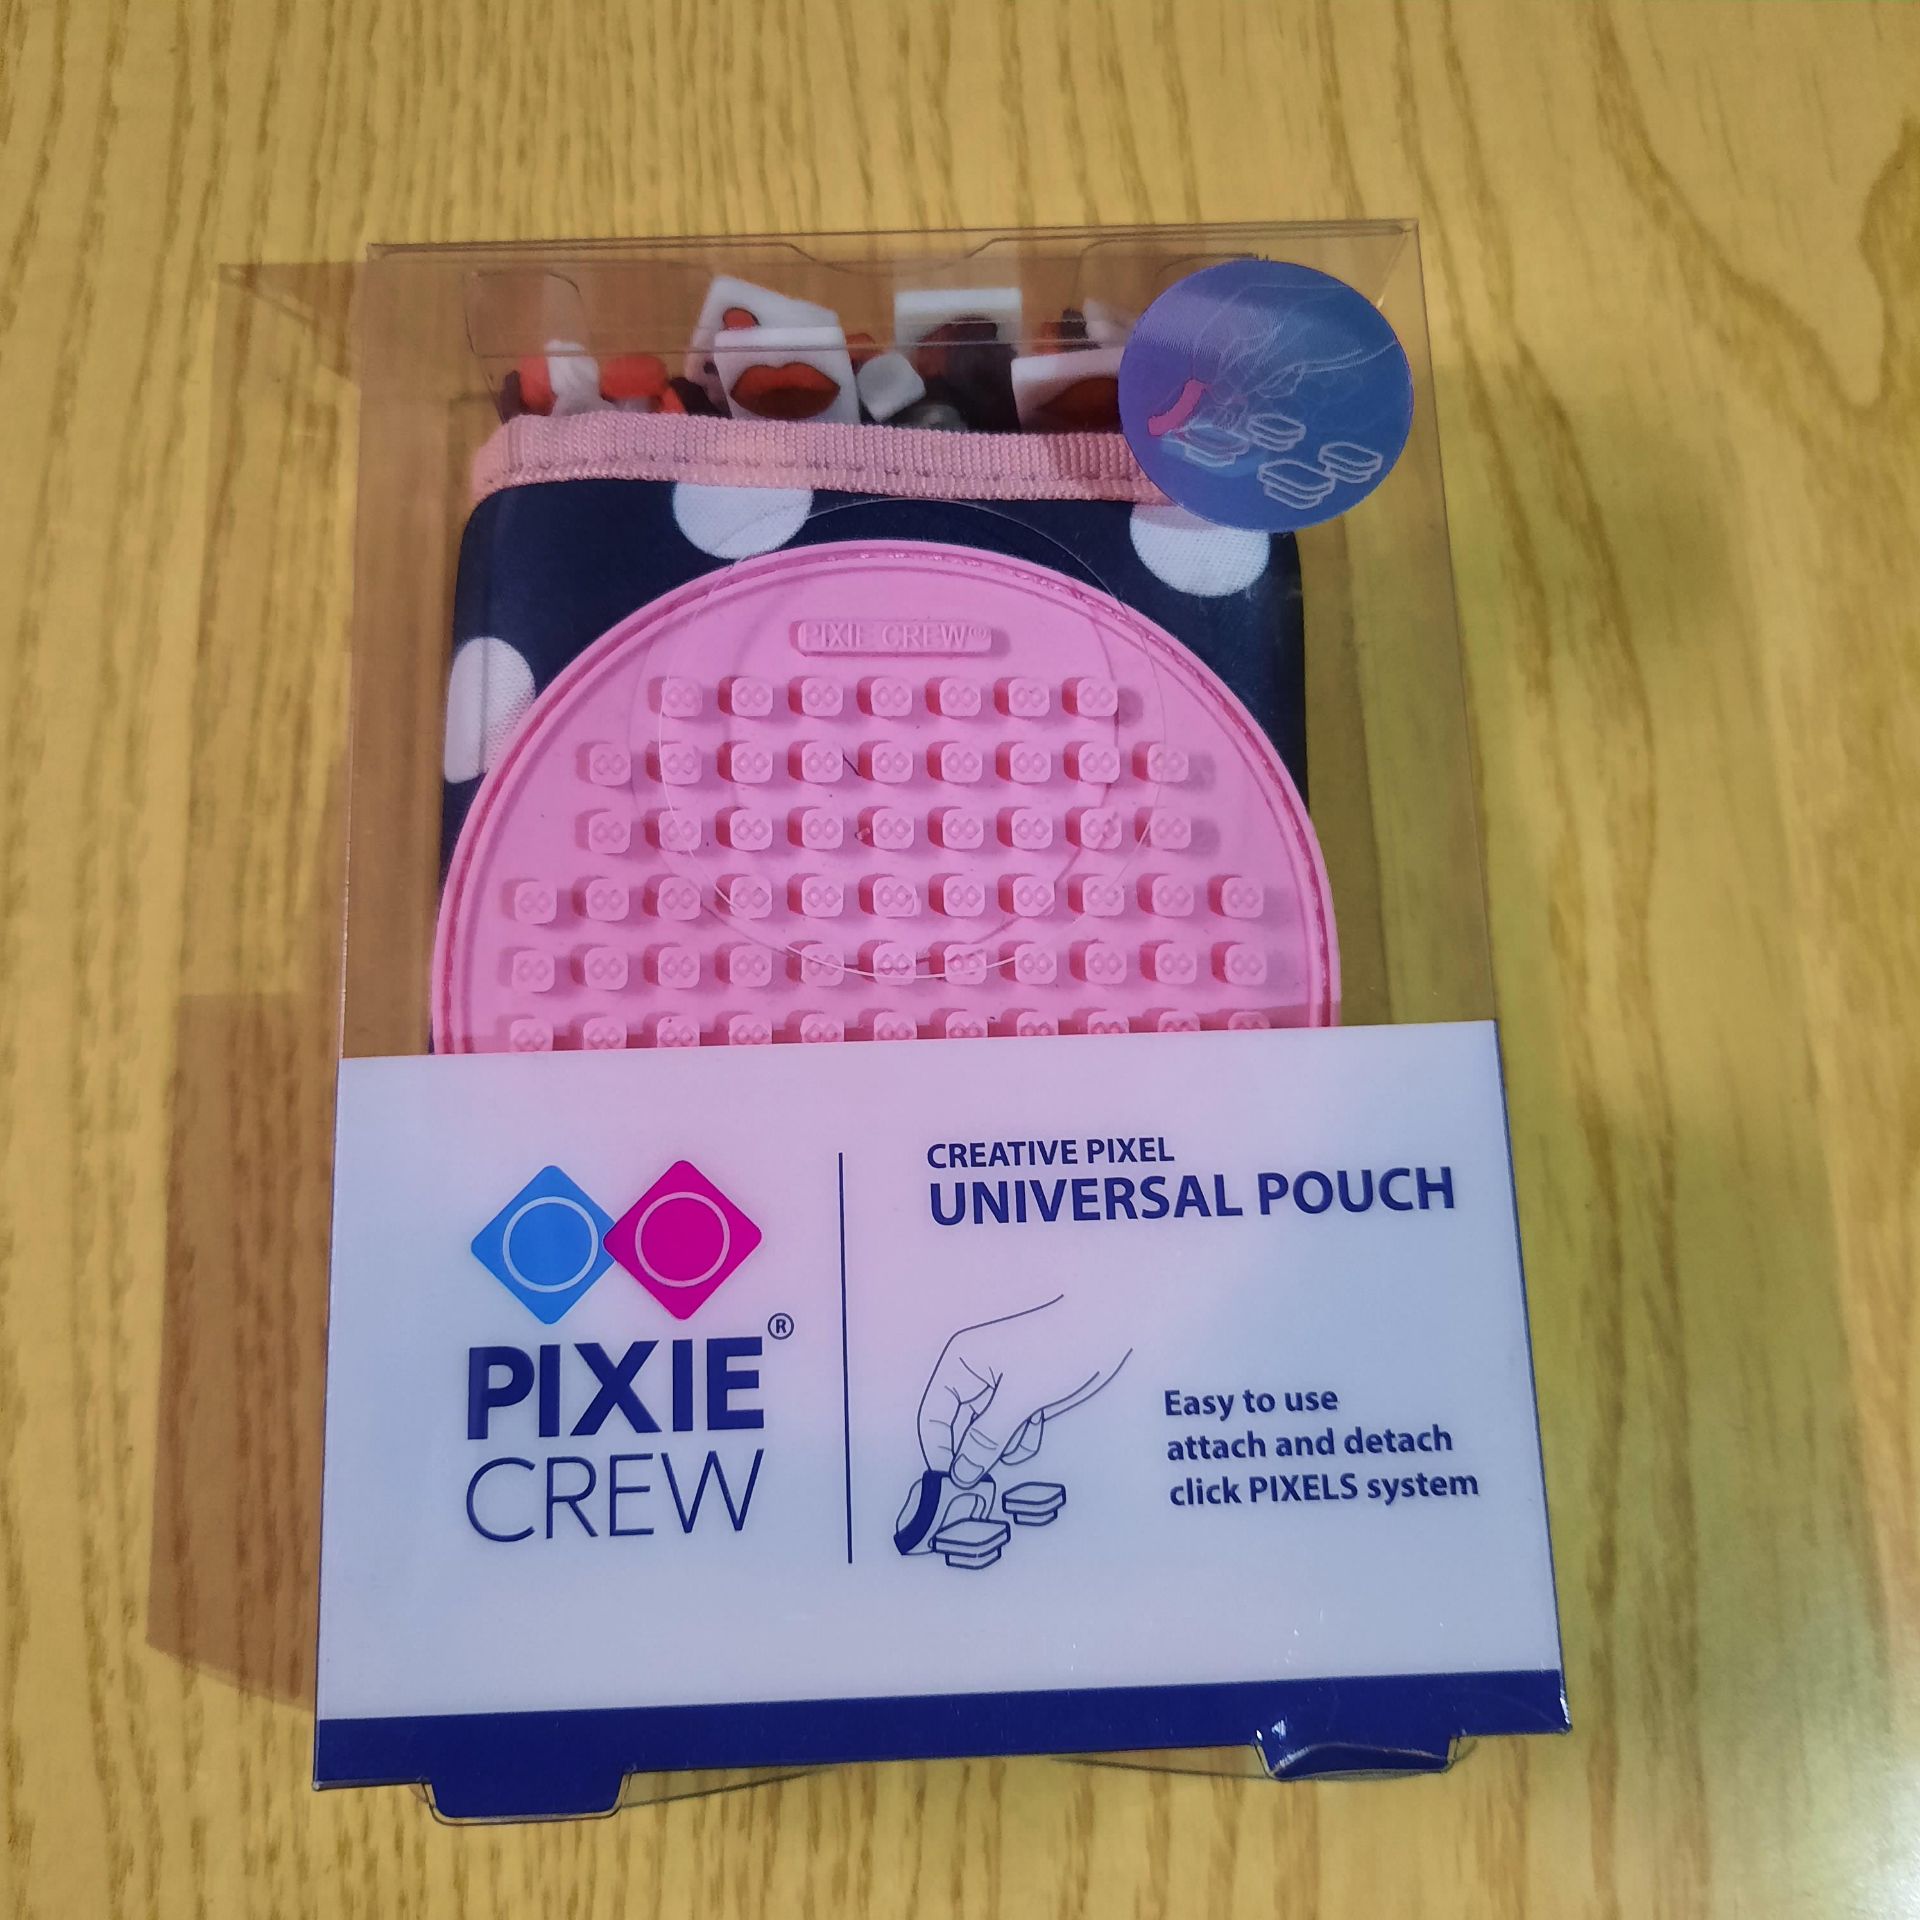 X 3 BRAND NEW PIXIE CREW UNIVERSAL POUCH WITH A PINK POUCH & 65 FREE PIXEL. TOTAL RRP £44.95